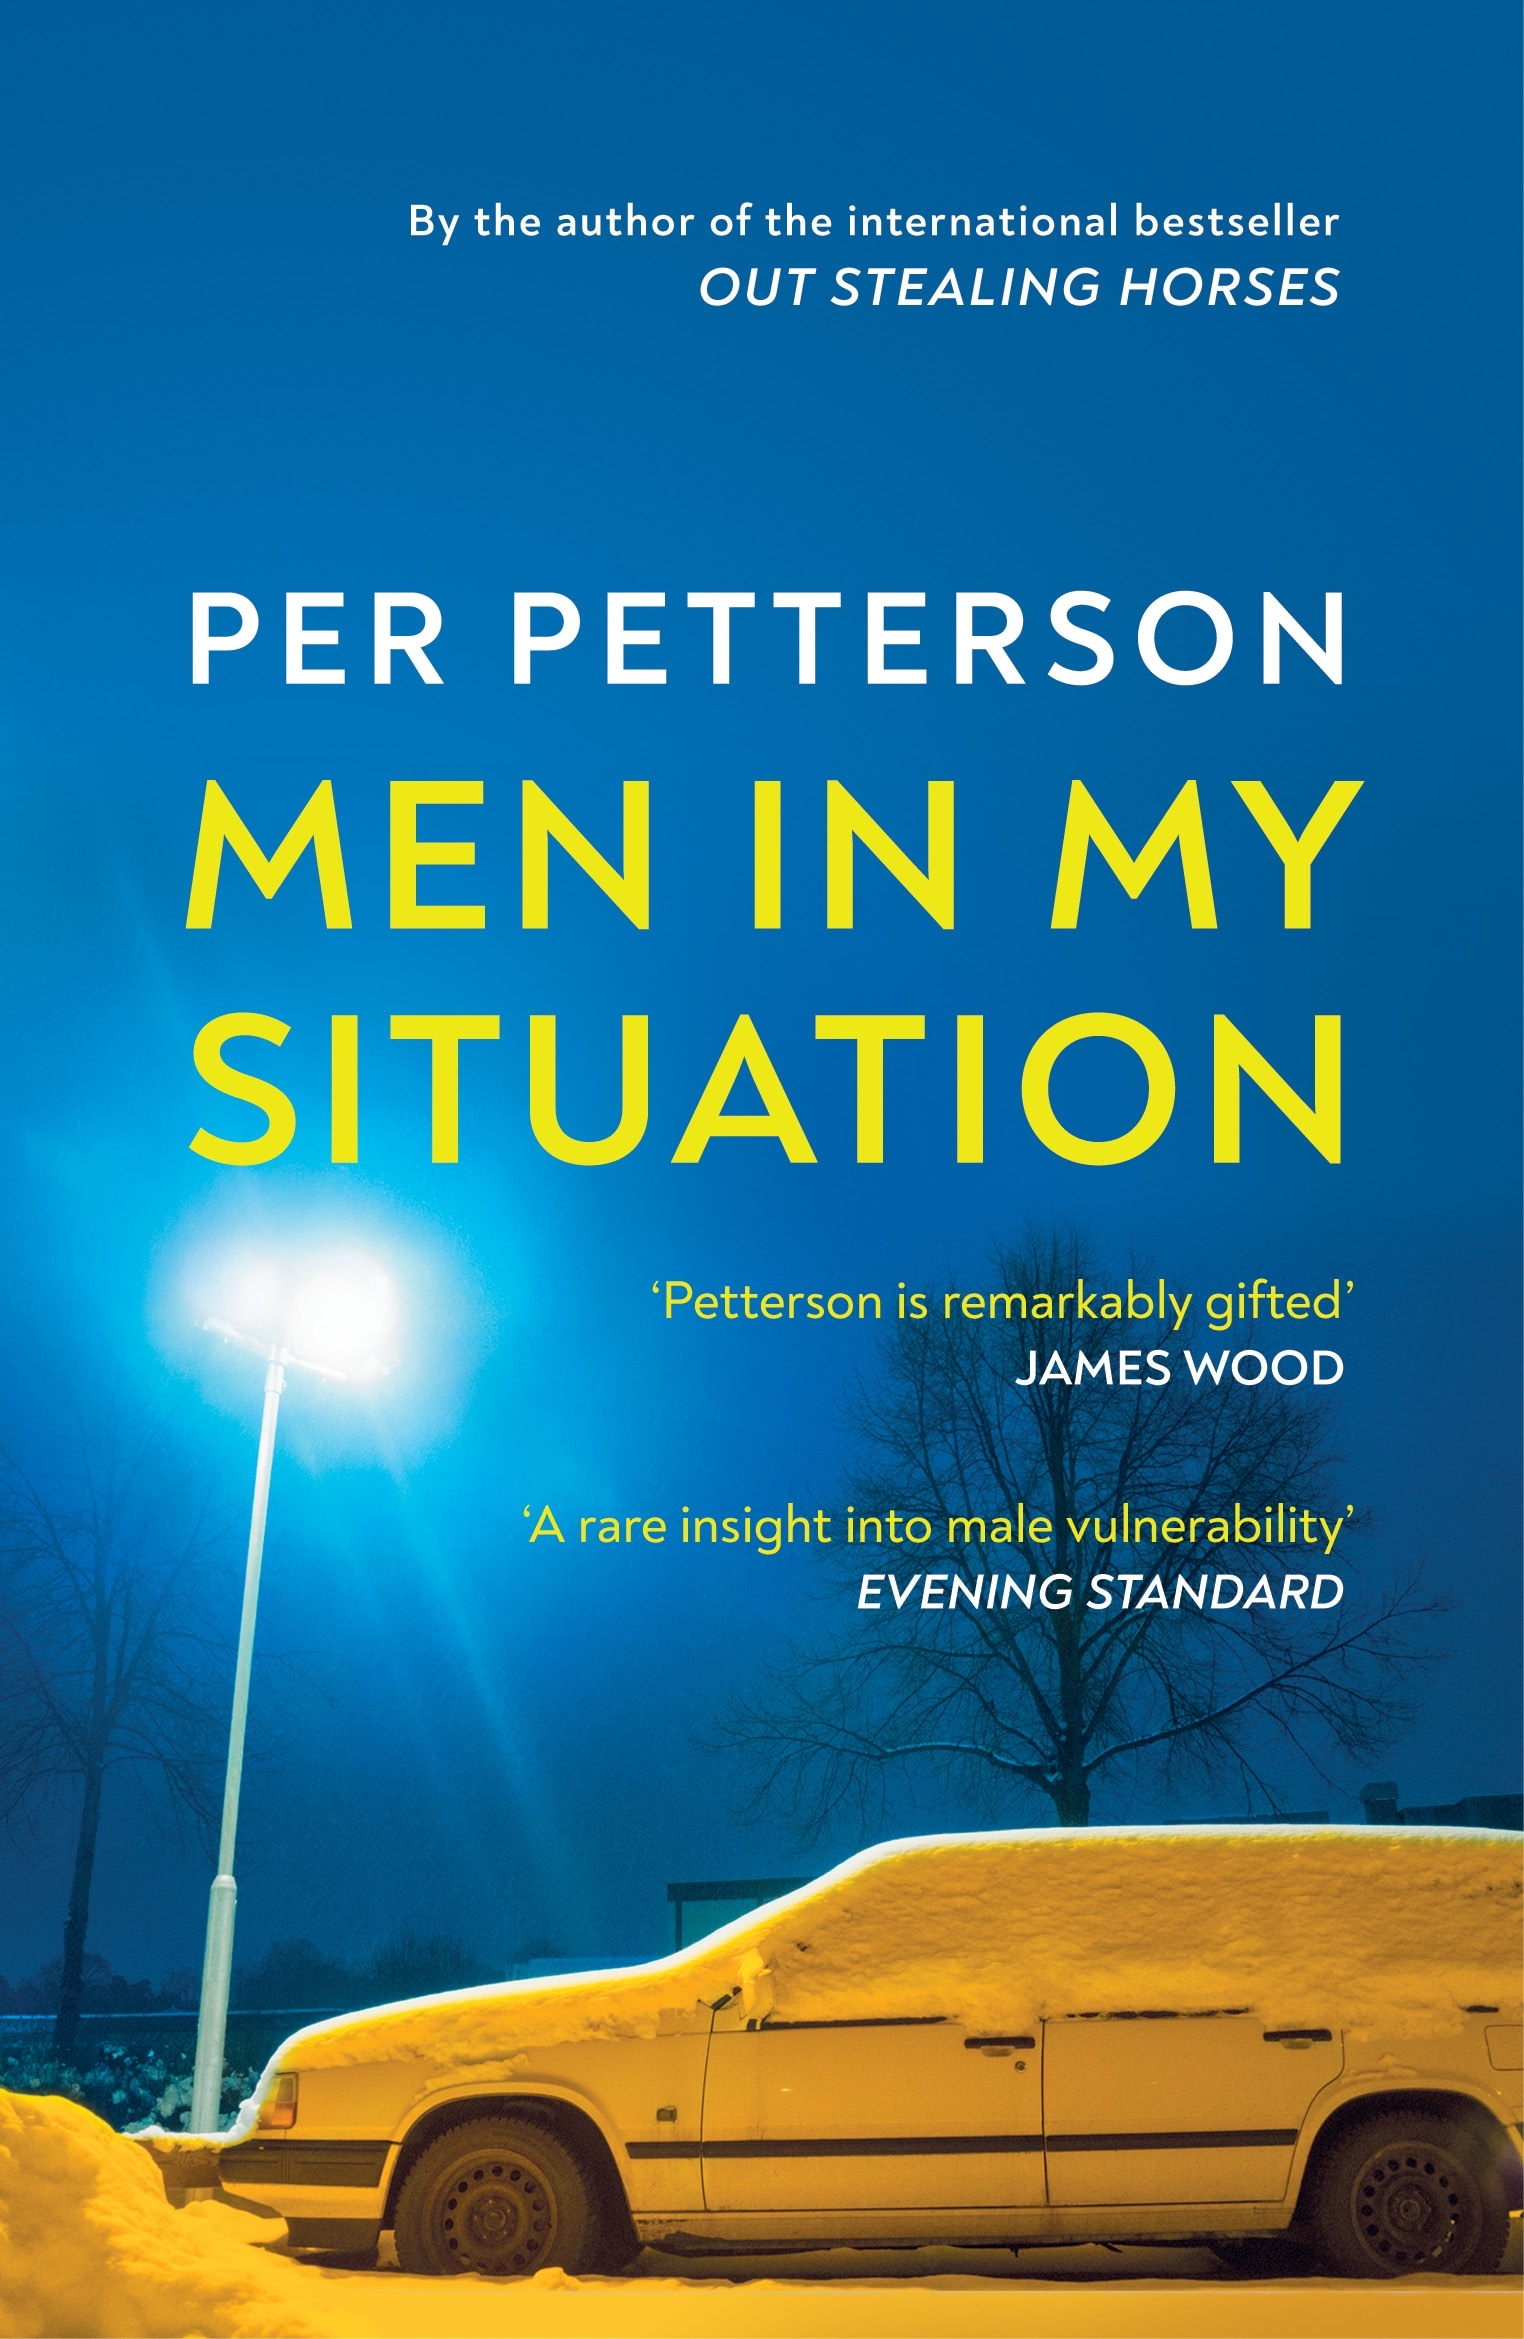 Book “Men in My Situation” by Per Petterson — August 4, 2022